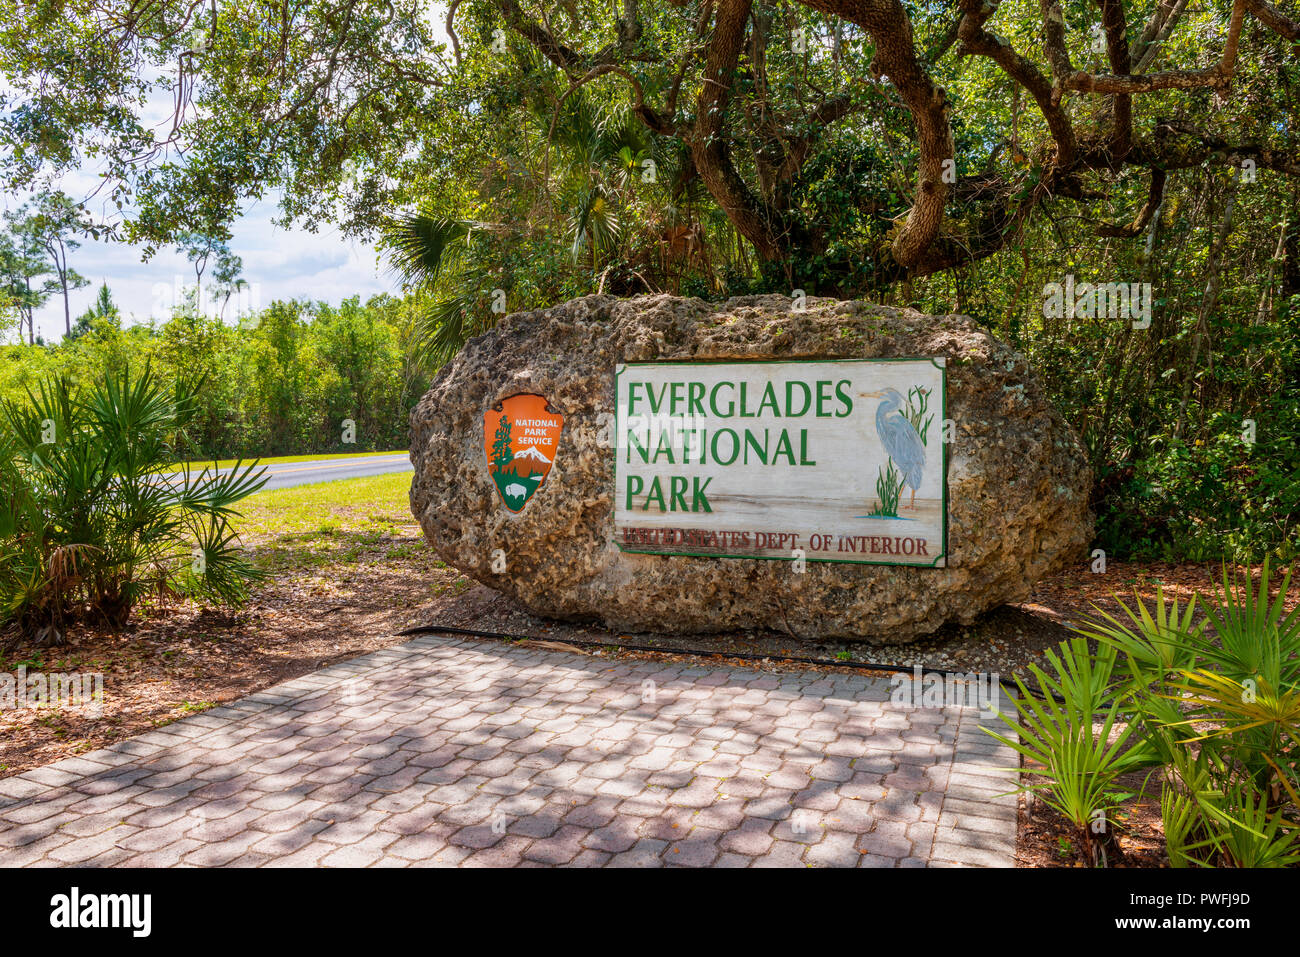 Entrance sign to Everglades National Park in Florida, USA. The Everglades is a natural region of tropical wetlands. Stock Photo